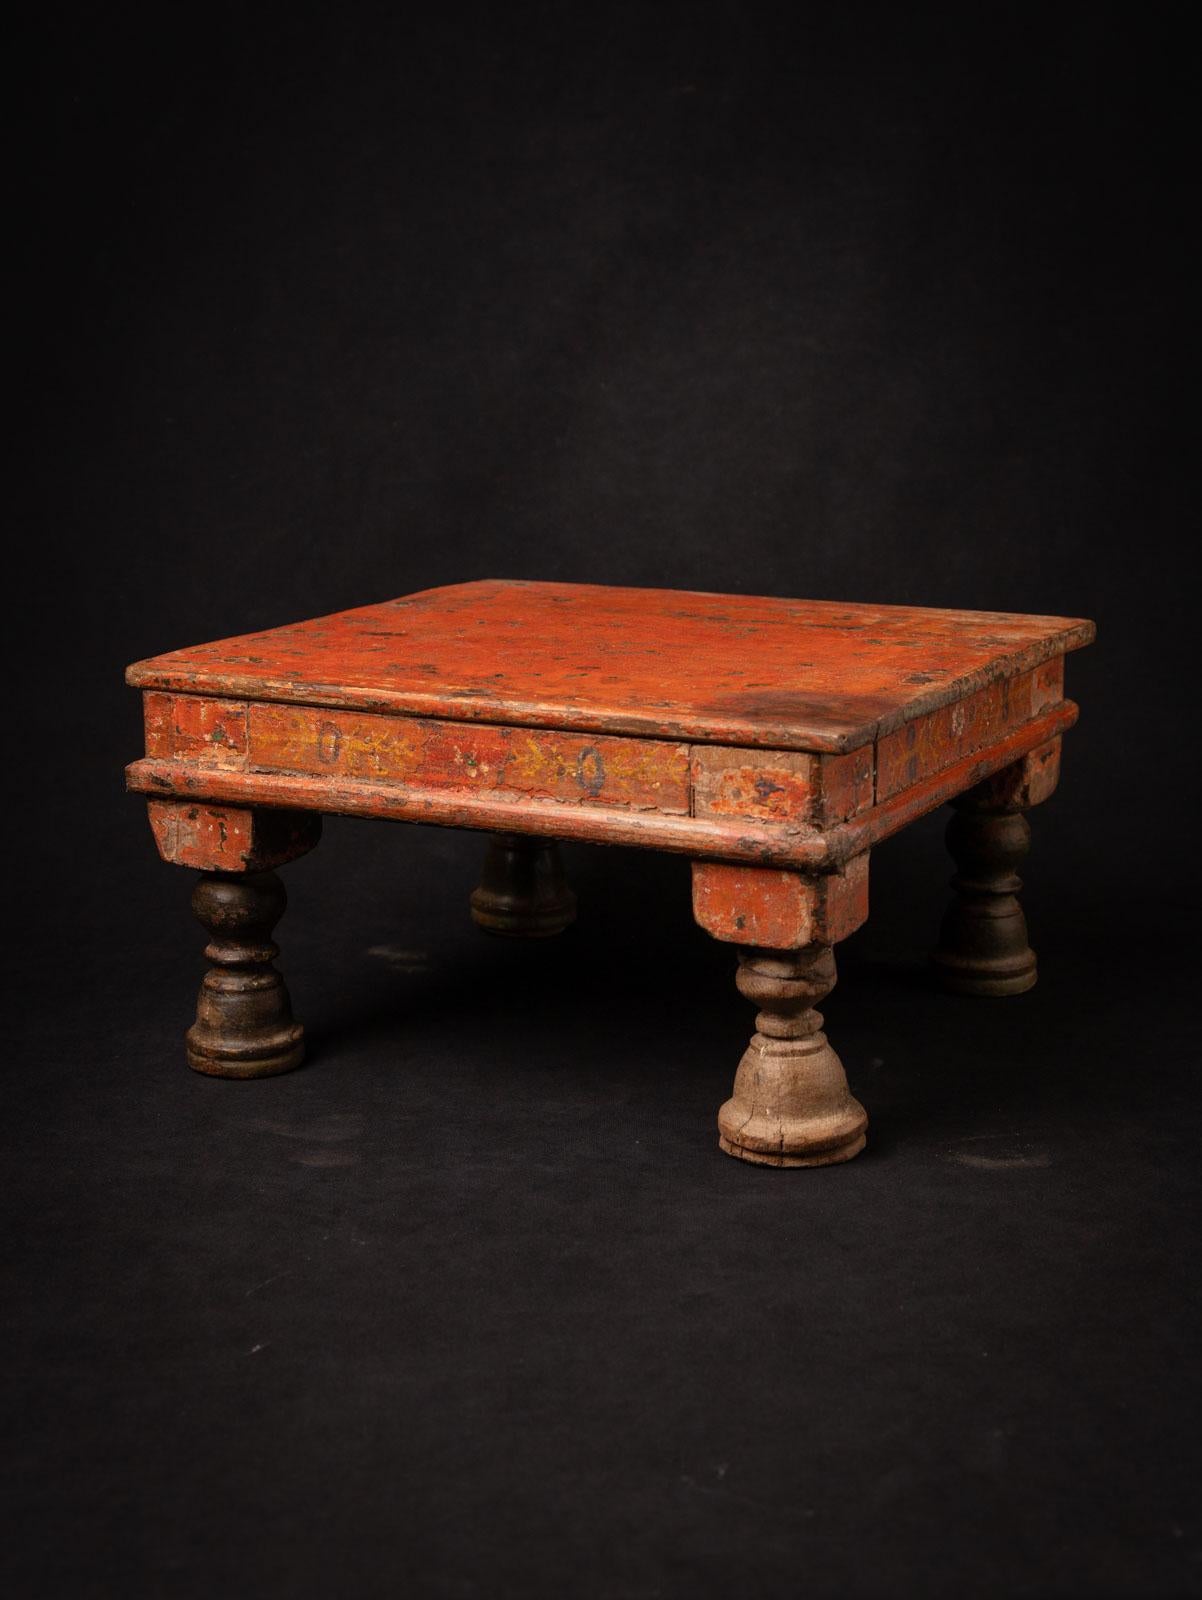 Antique Indian wooden shrine / table
Material : wood
16,5 cm high
30,5 cm wide and 29,2 cm deep
19th century
Weight: 1,6 kgs
Originating from India
Nr: 3830-279